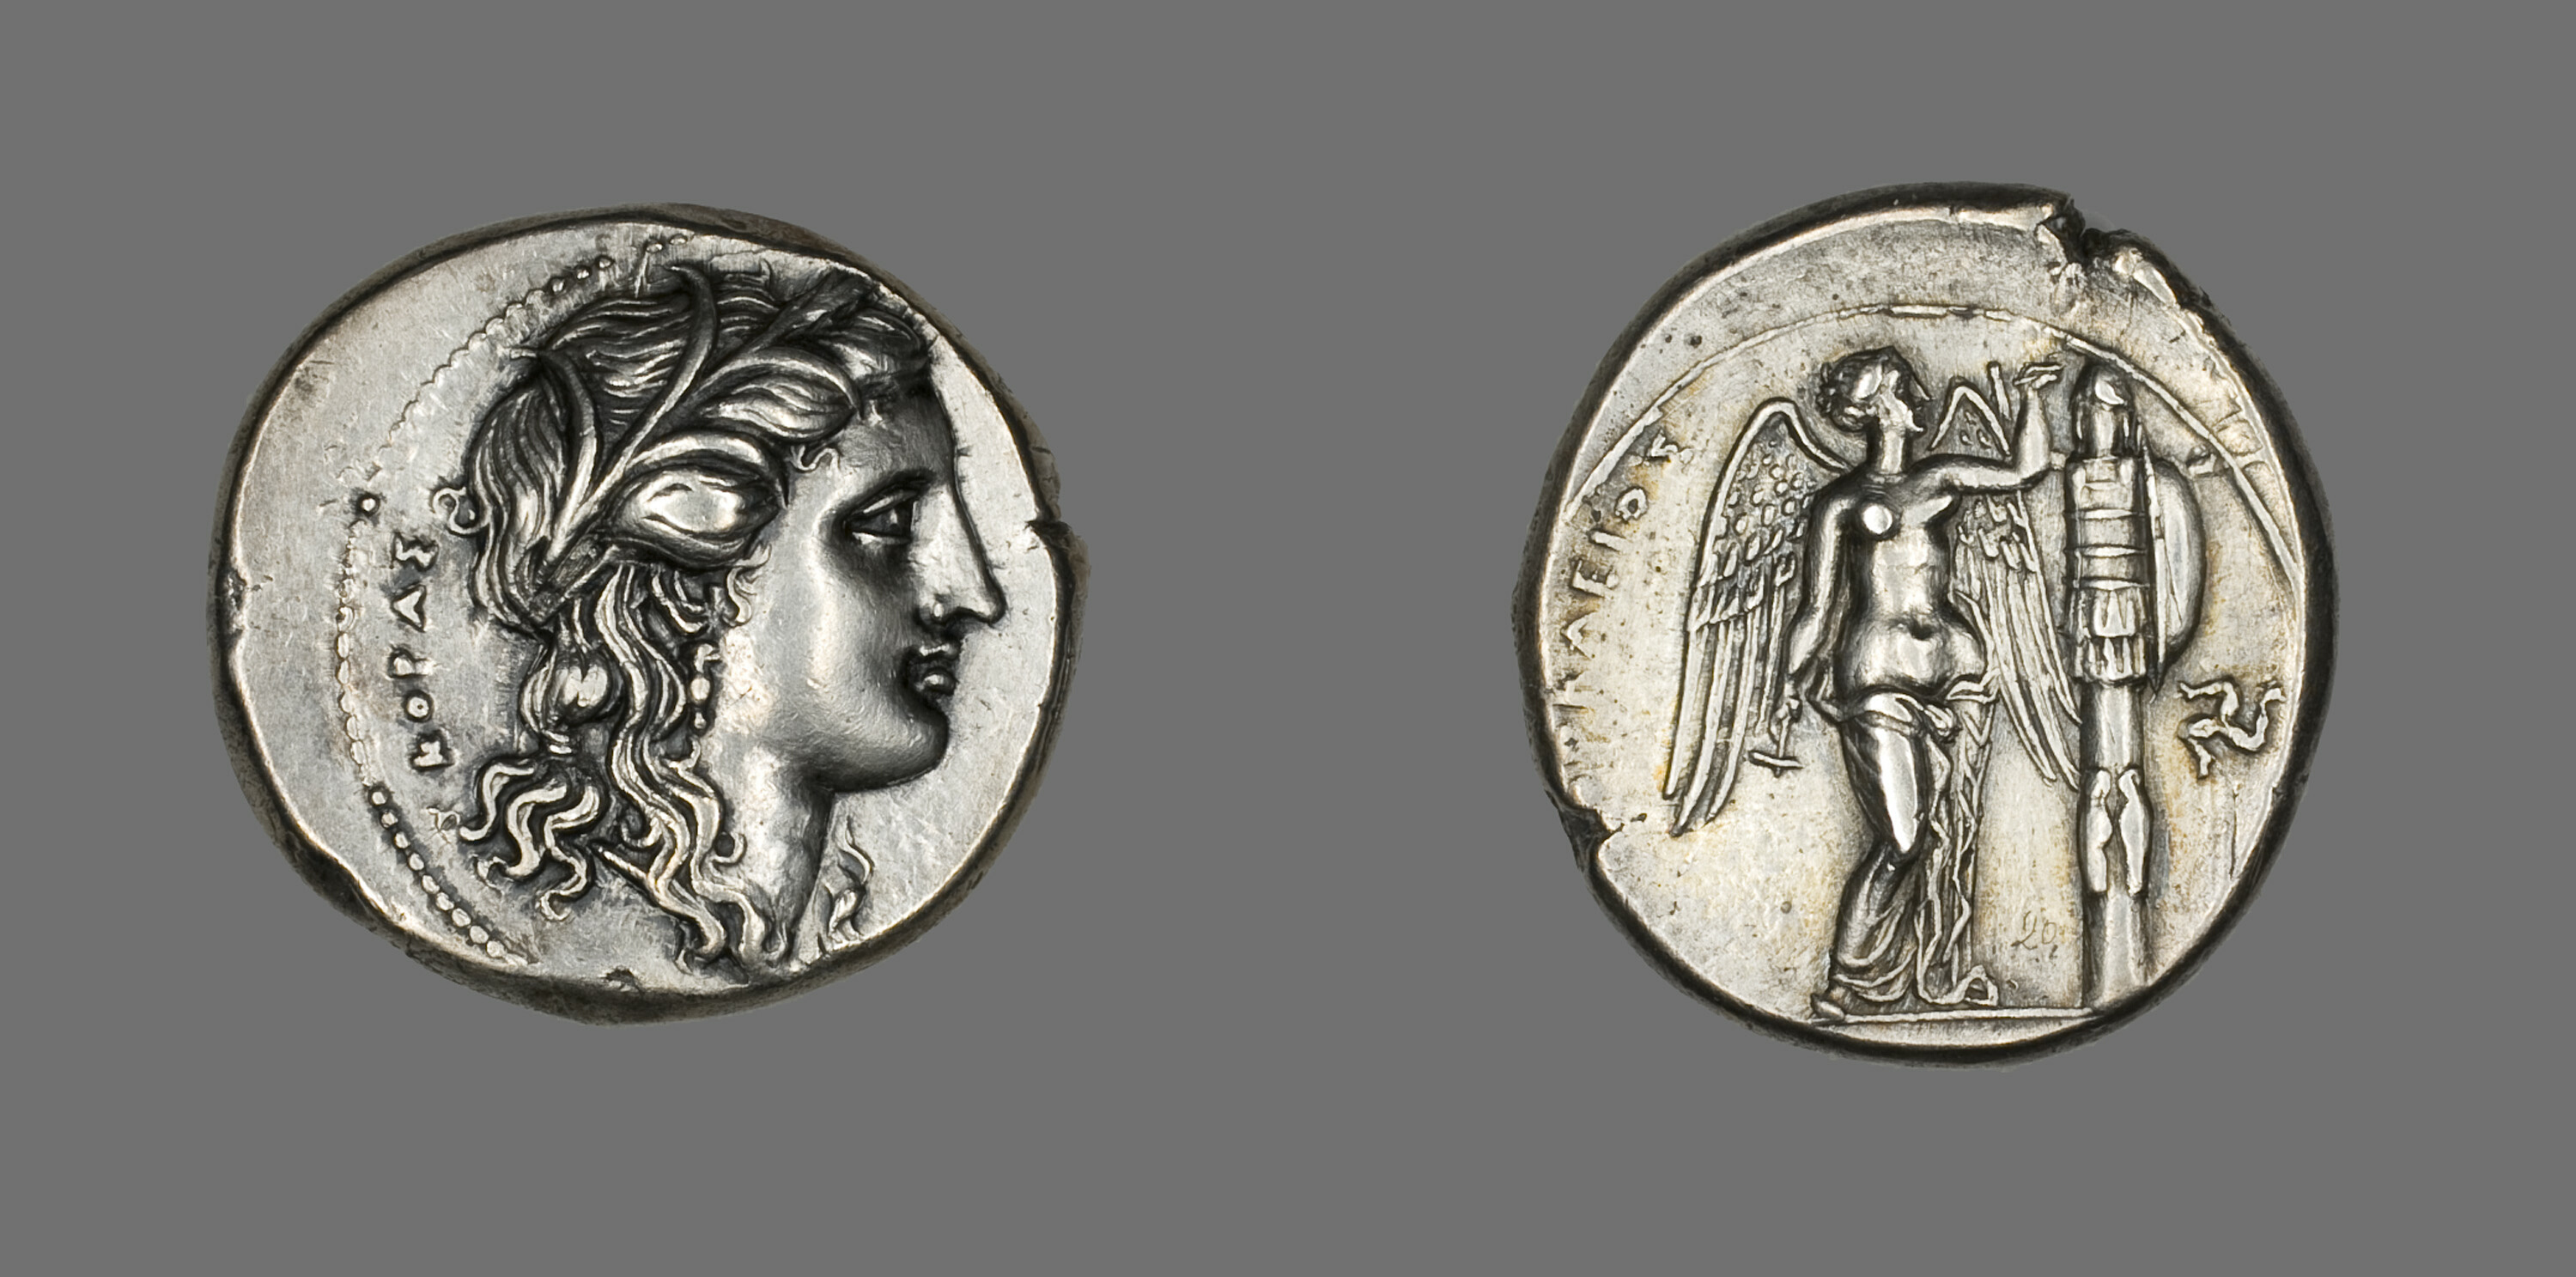 Silver tetradrachm from the ancient Greek city of Syracuse, depicting the goddess Persephone, 310-307 BCE.jpg